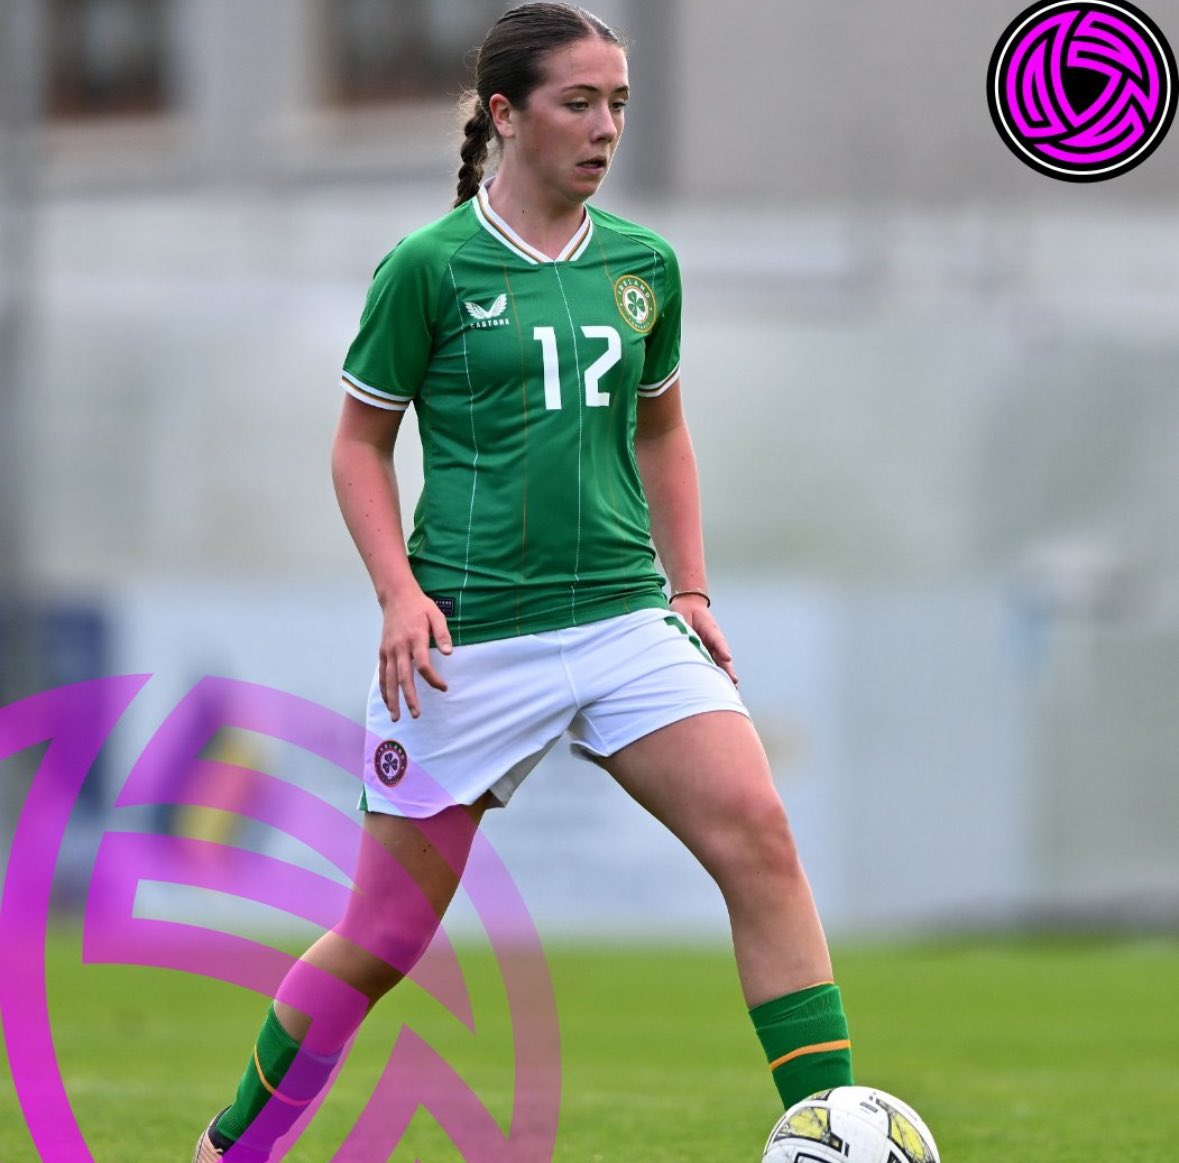 Keep an eye out for 👀 Heather Loomes #LOI24 | #WLOI